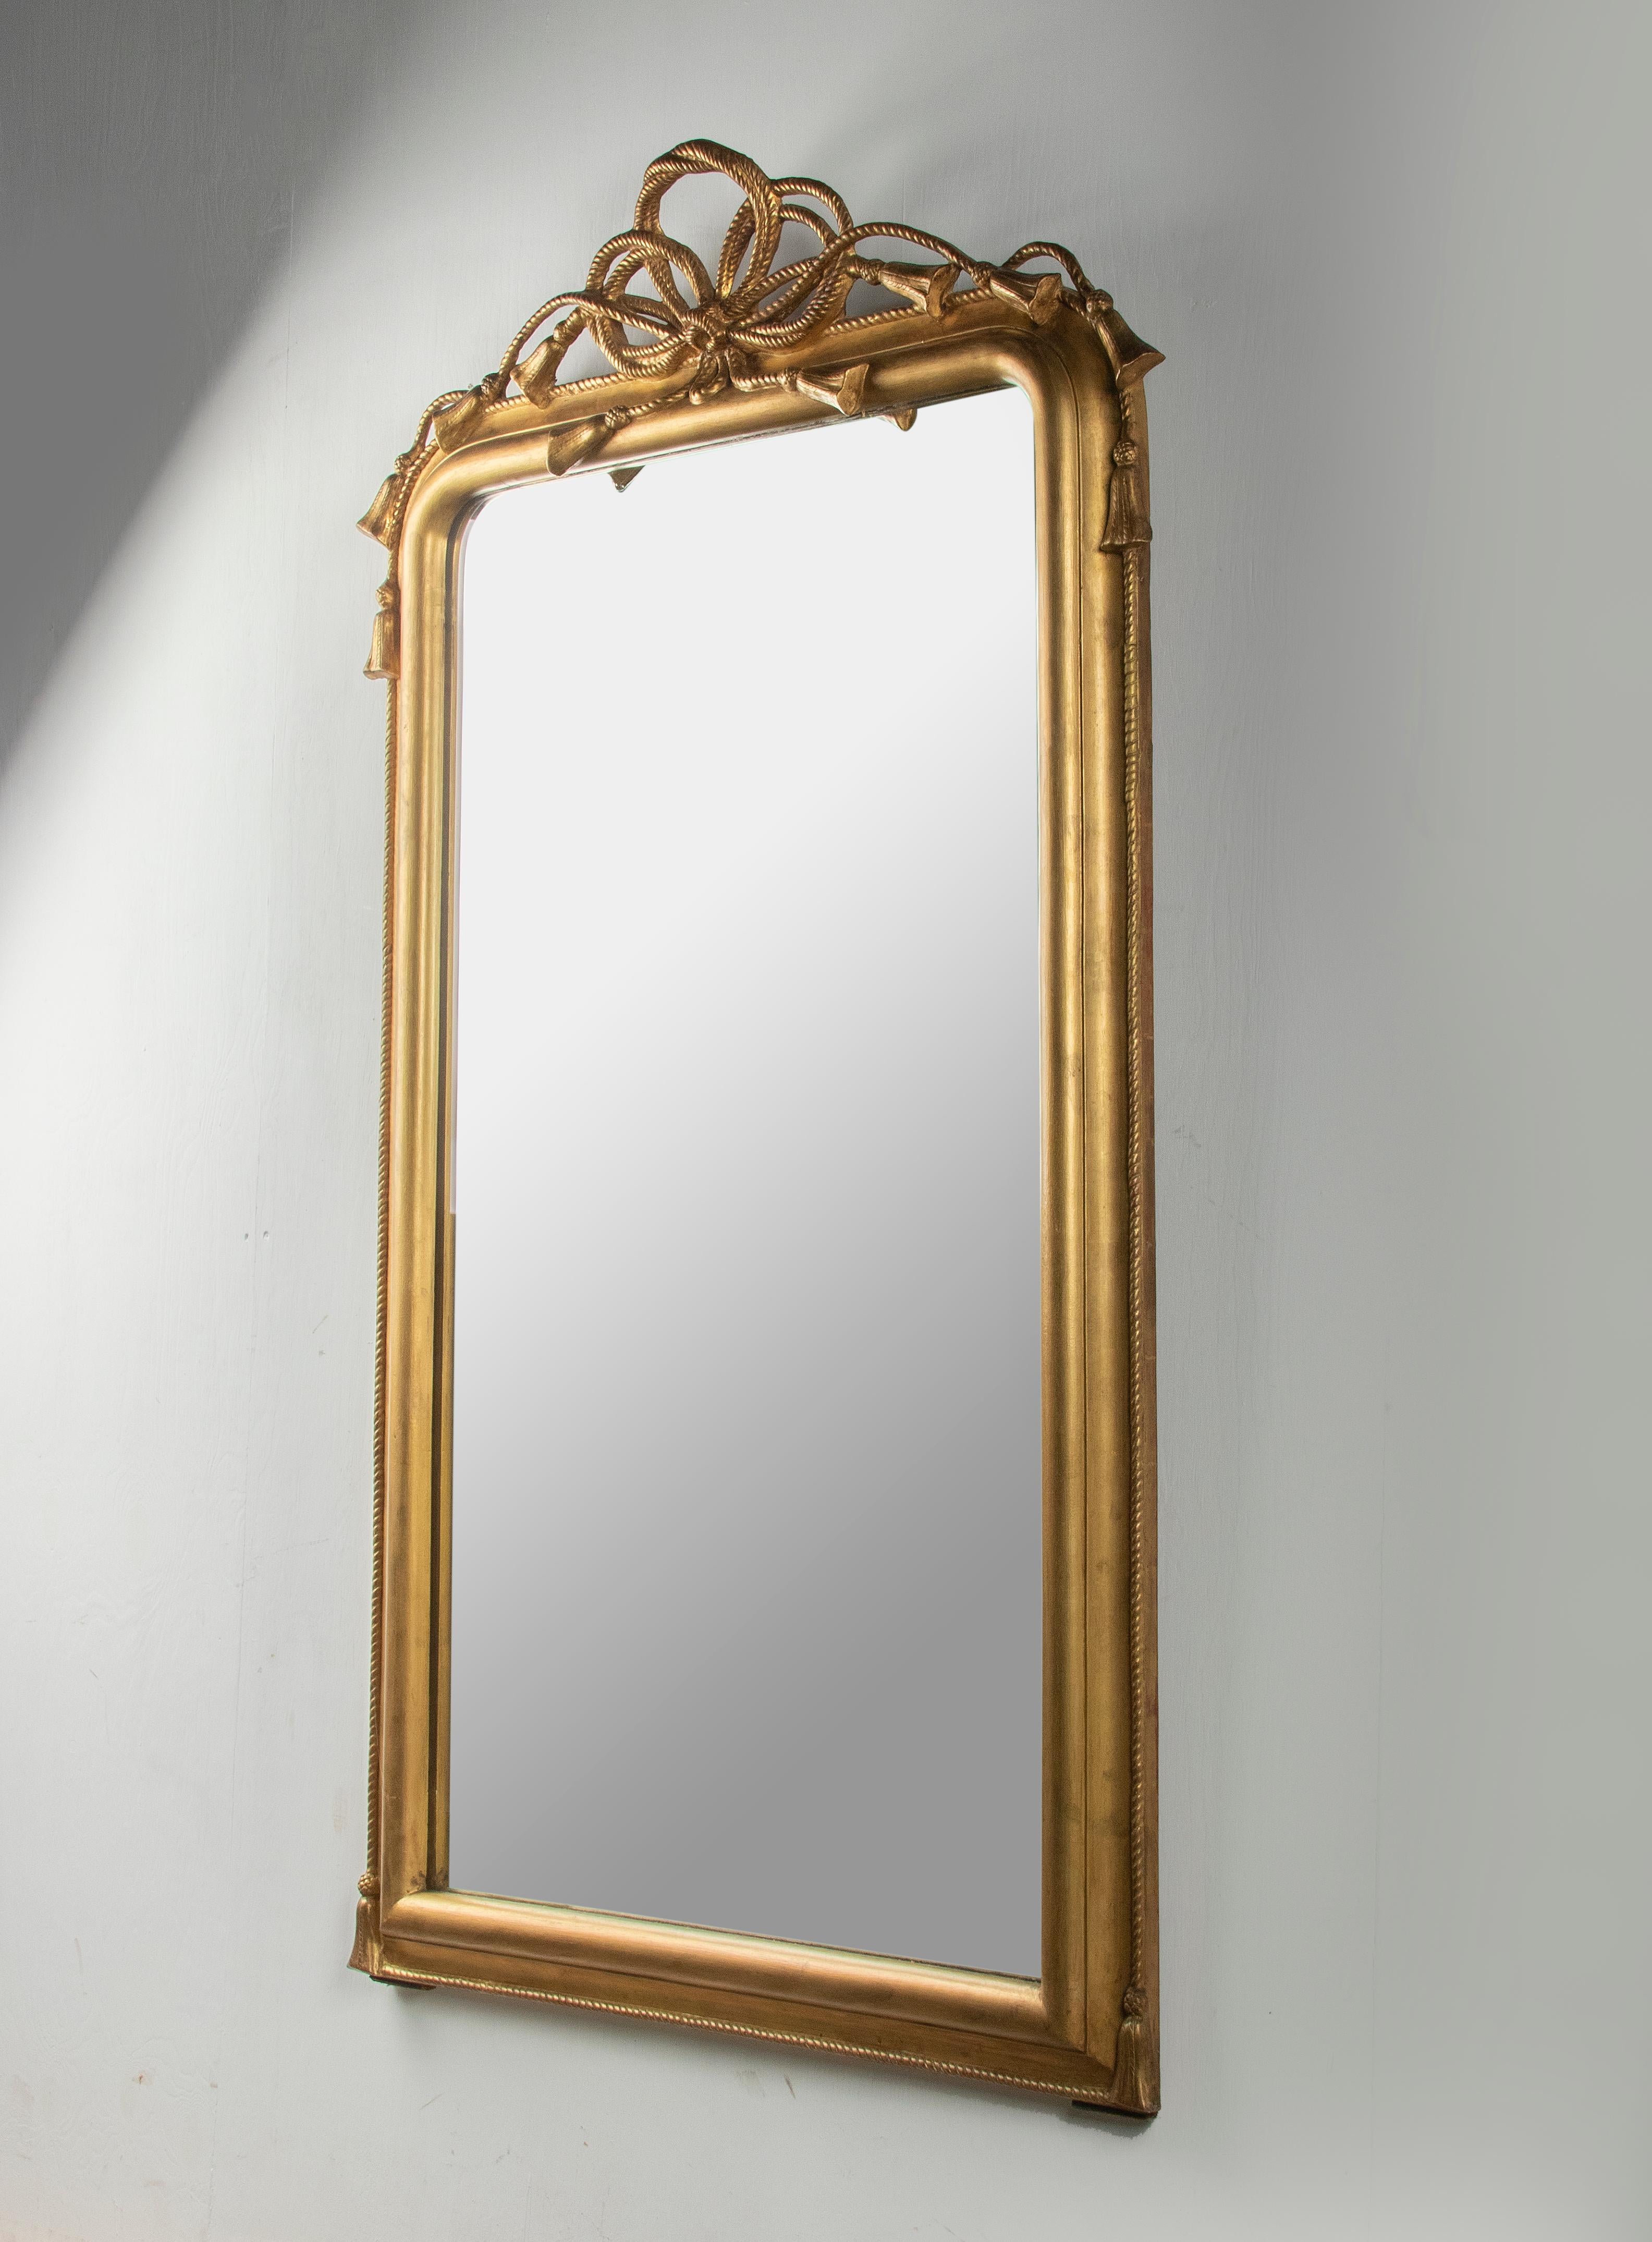 Pine 19th Century Napoleon III Gilded Wall Mirror with Rope and Tassels For Sale